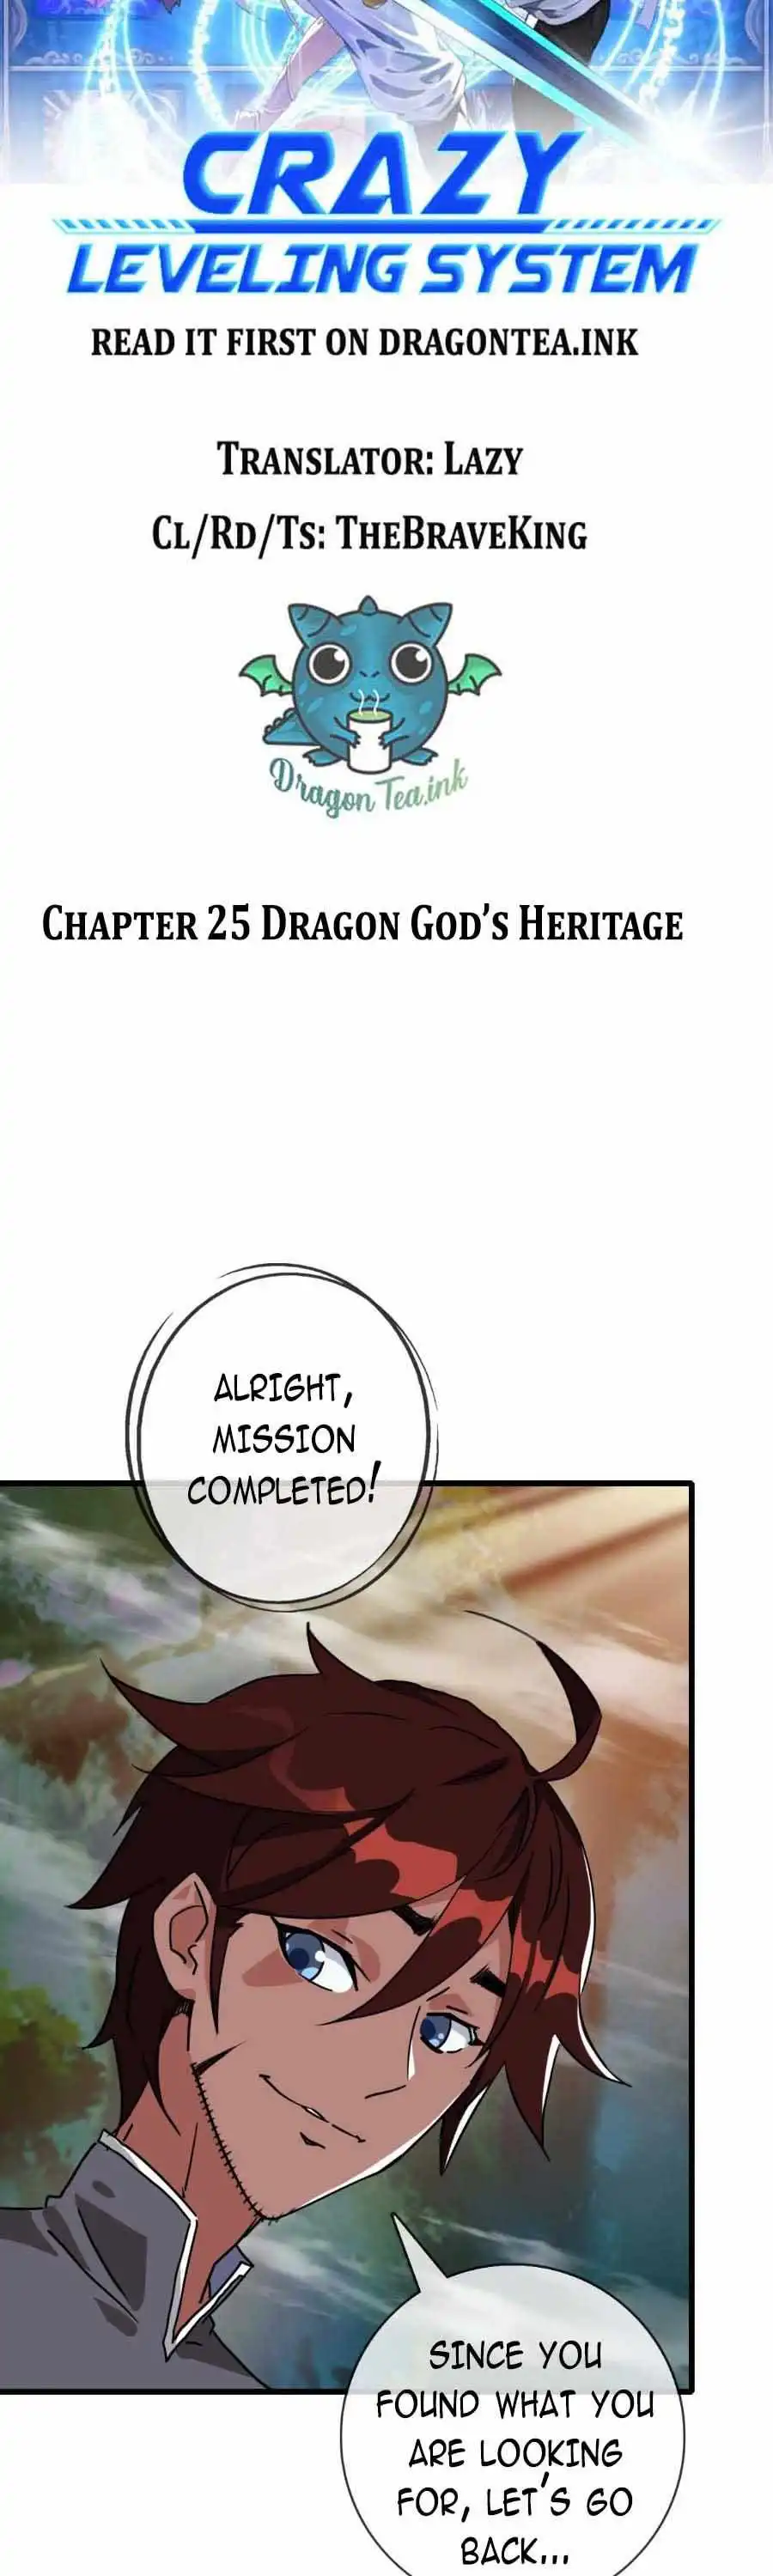 Crazy Leveling System Chapter 25